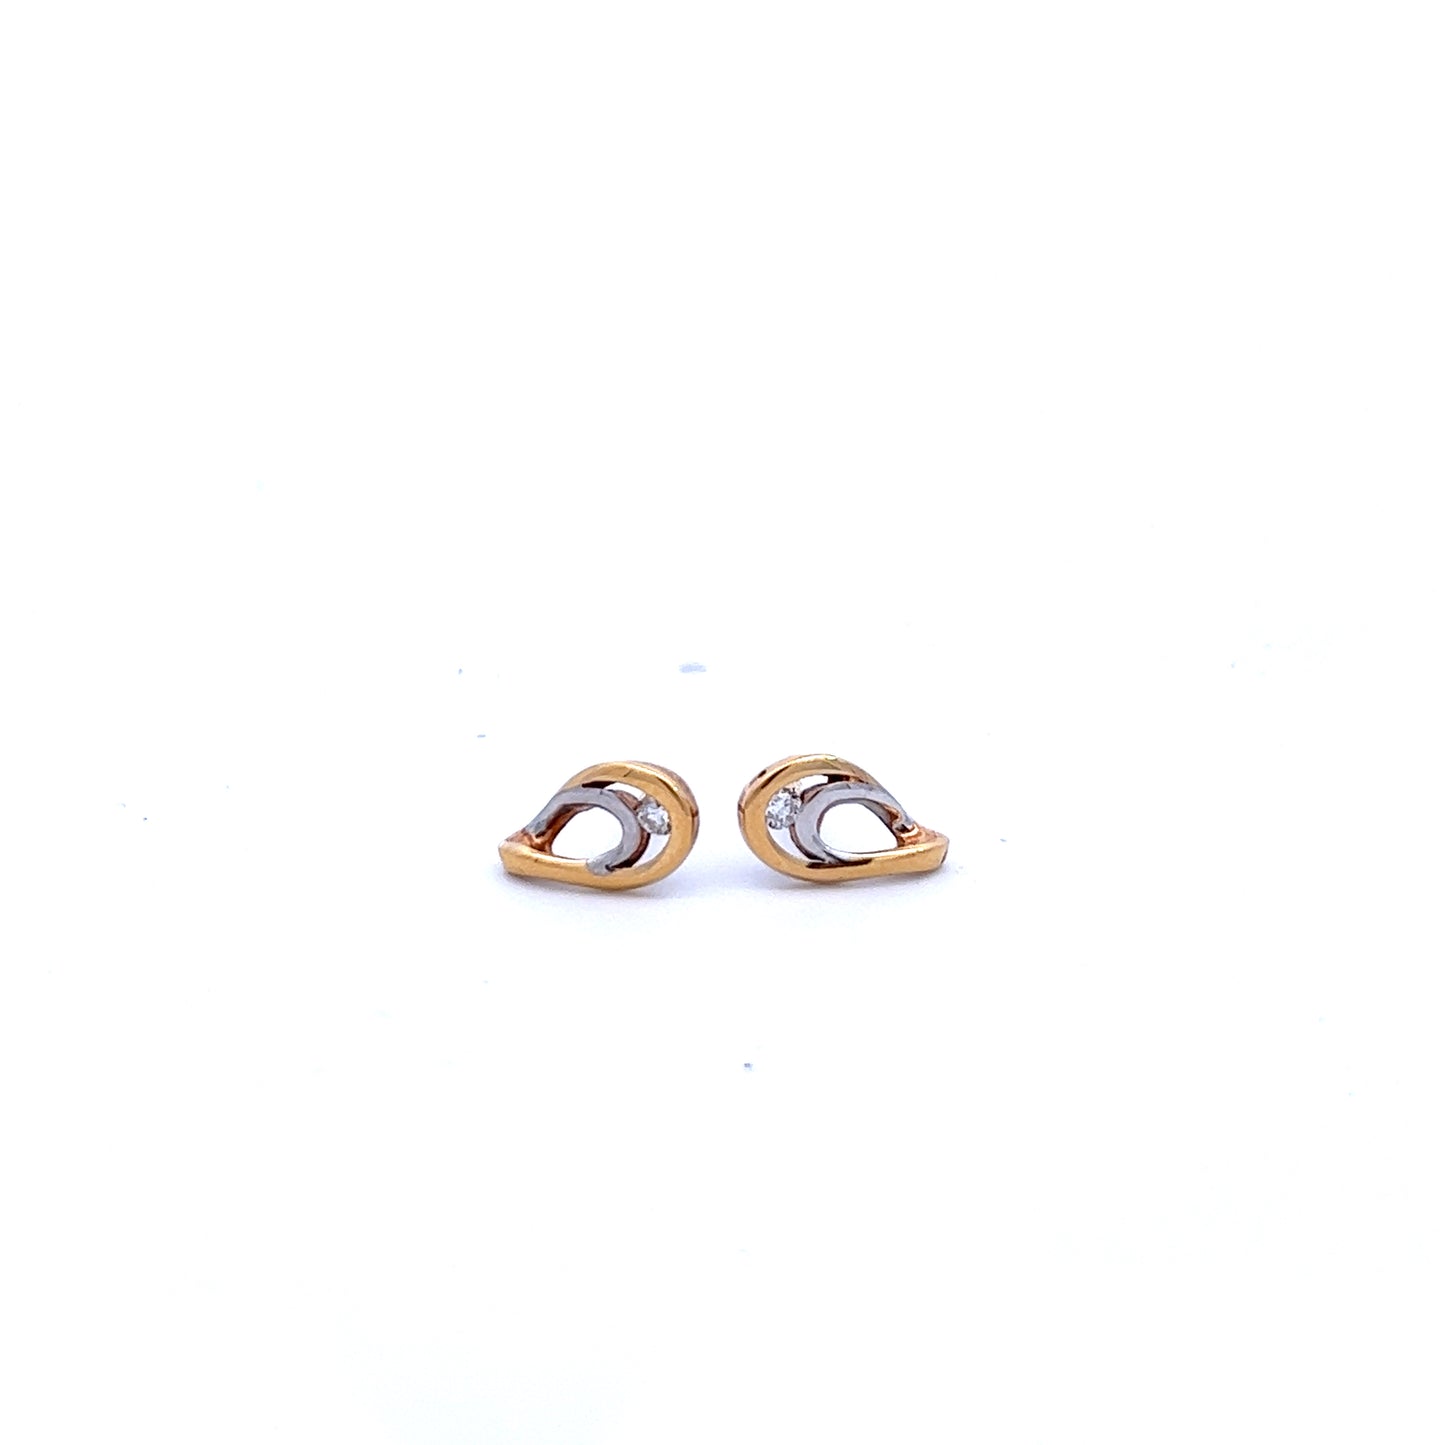 9ct Yellow and White Gold Diamond Stud Earrings